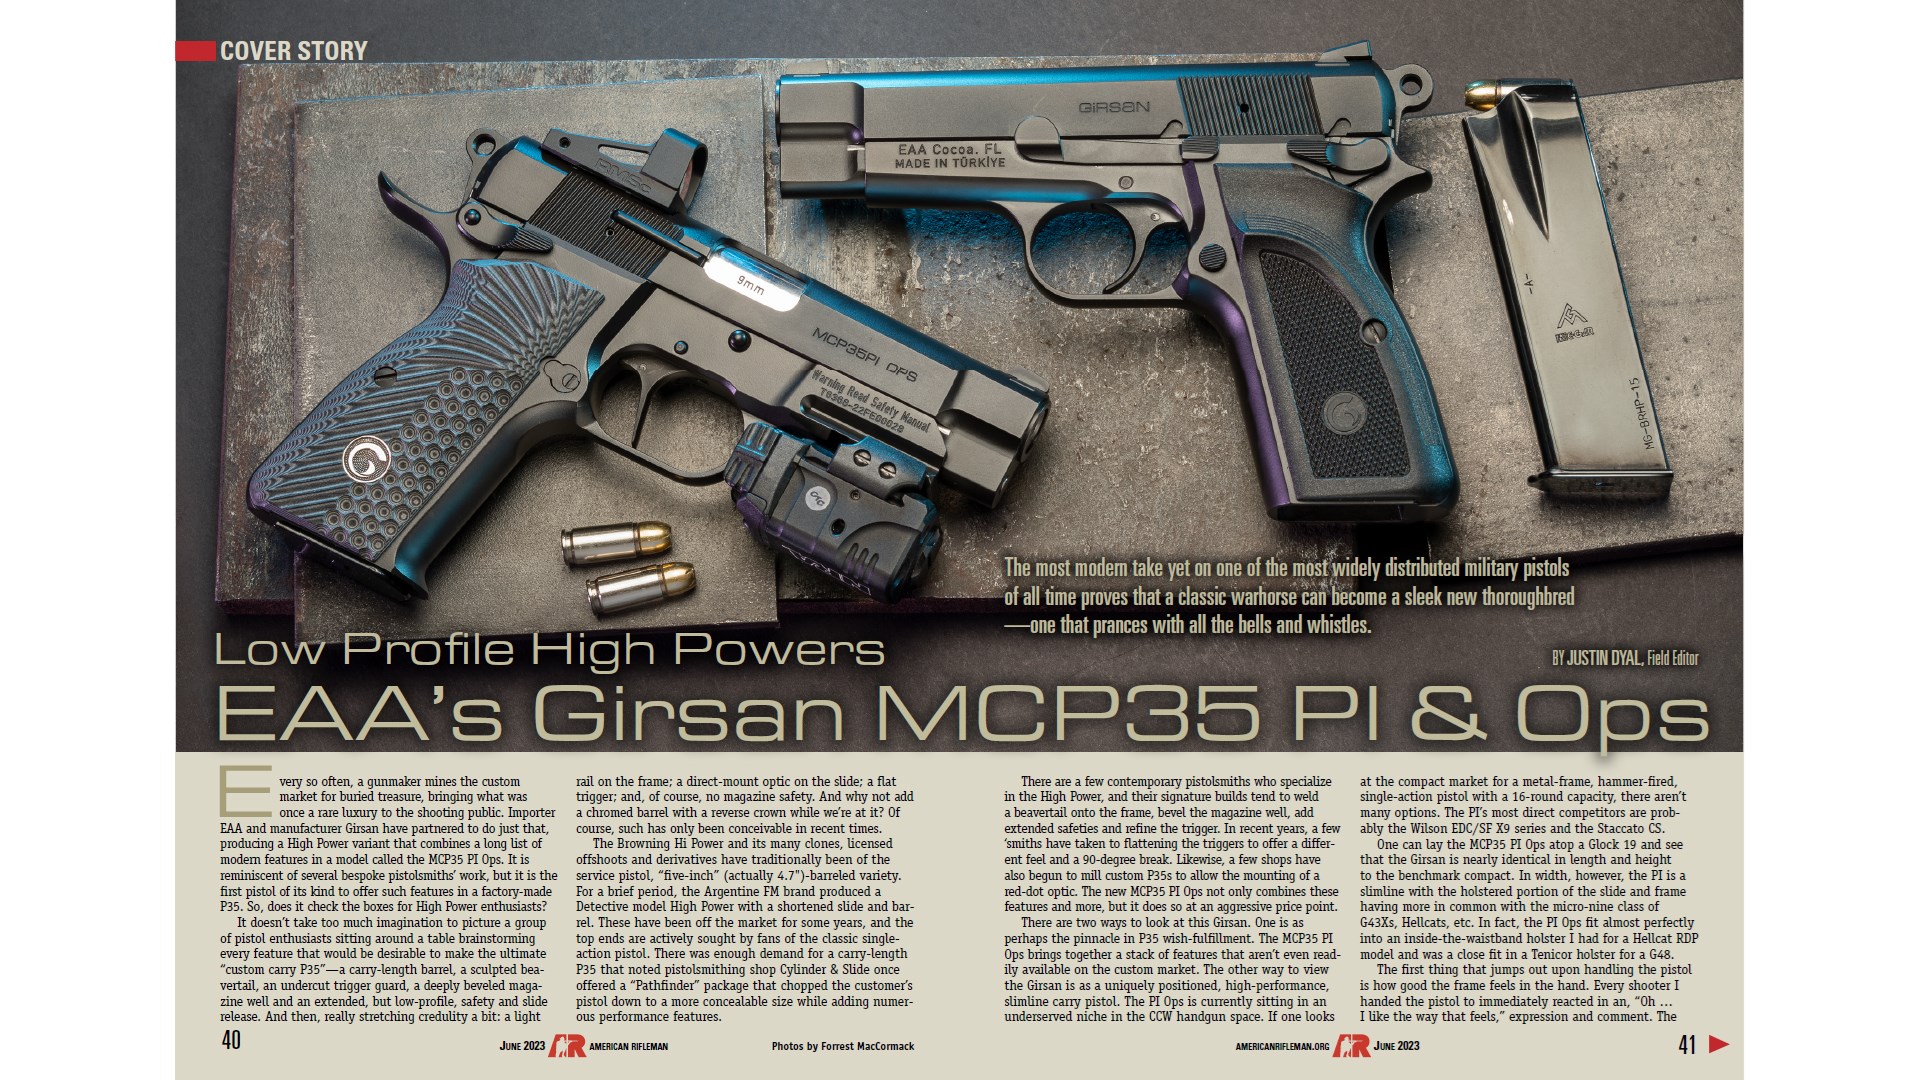 American Rifleman magazine centerfold featuring two handguns with accessories